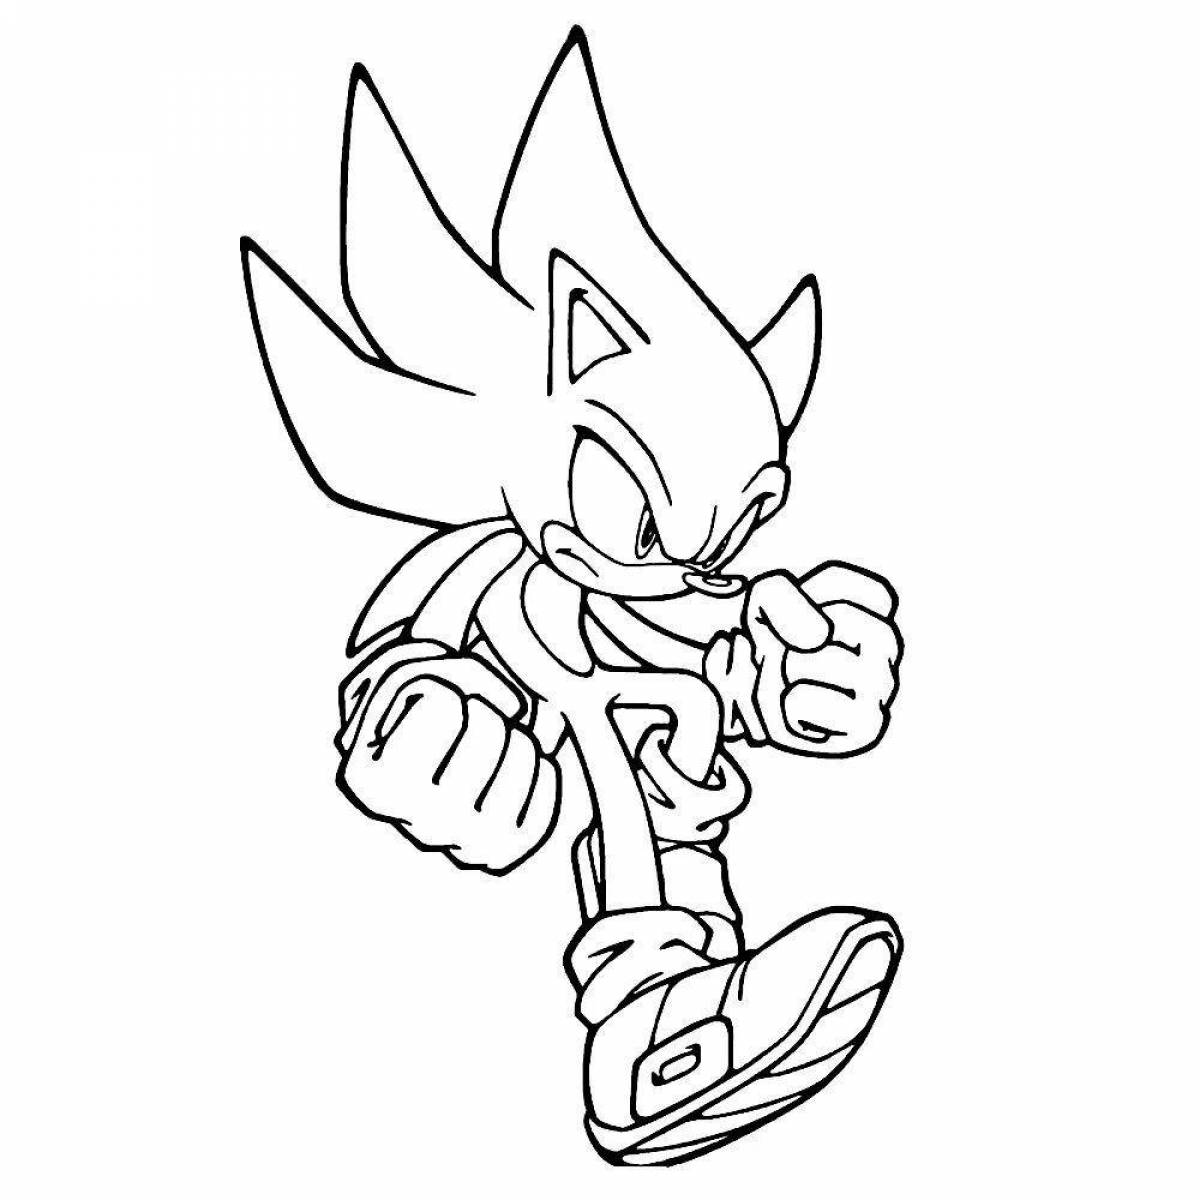 Great sonicexe coloring book